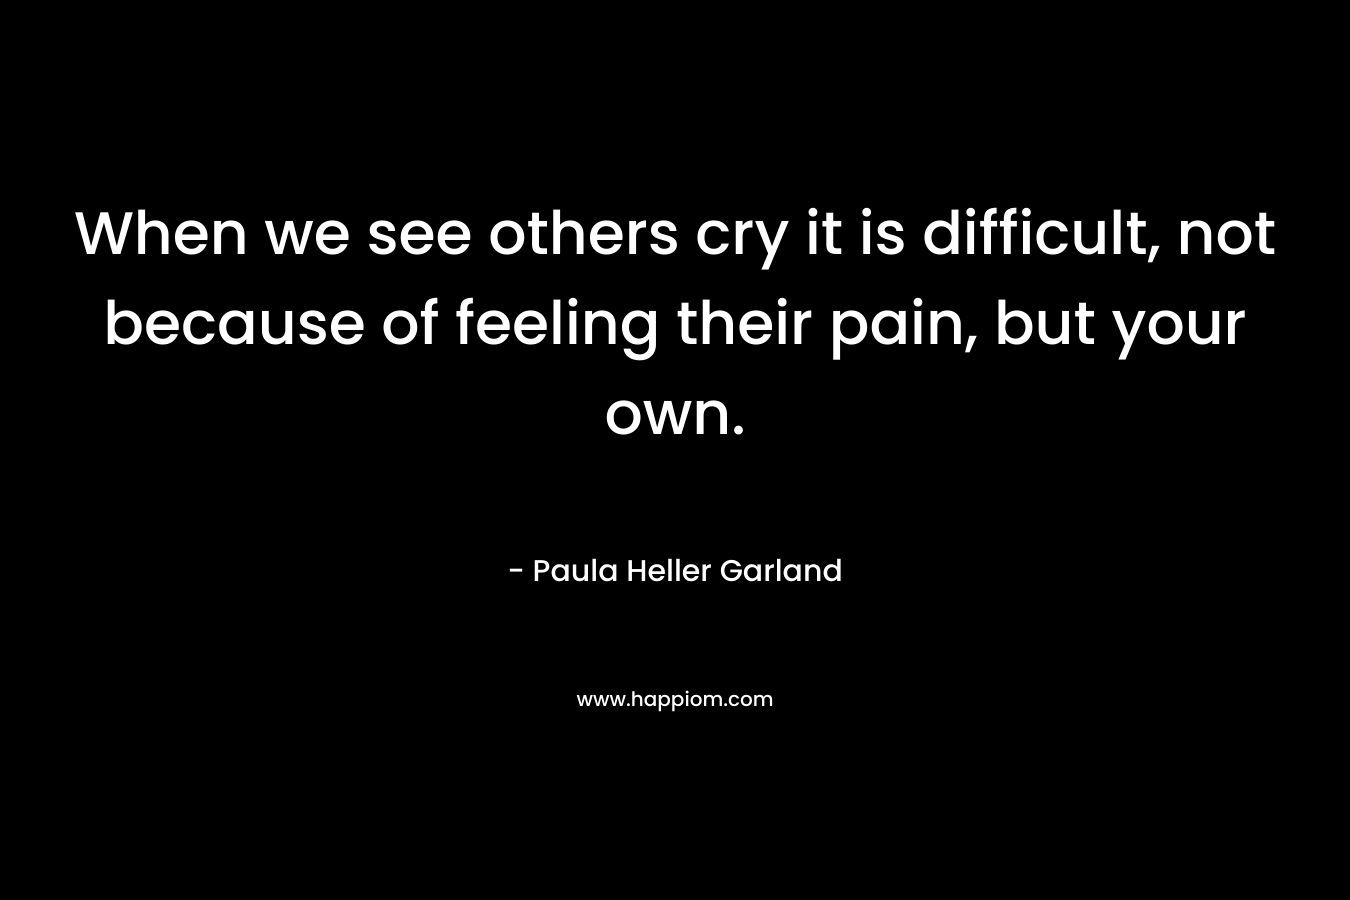 When we see others cry it is difficult, not because of feeling their pain, but your own.